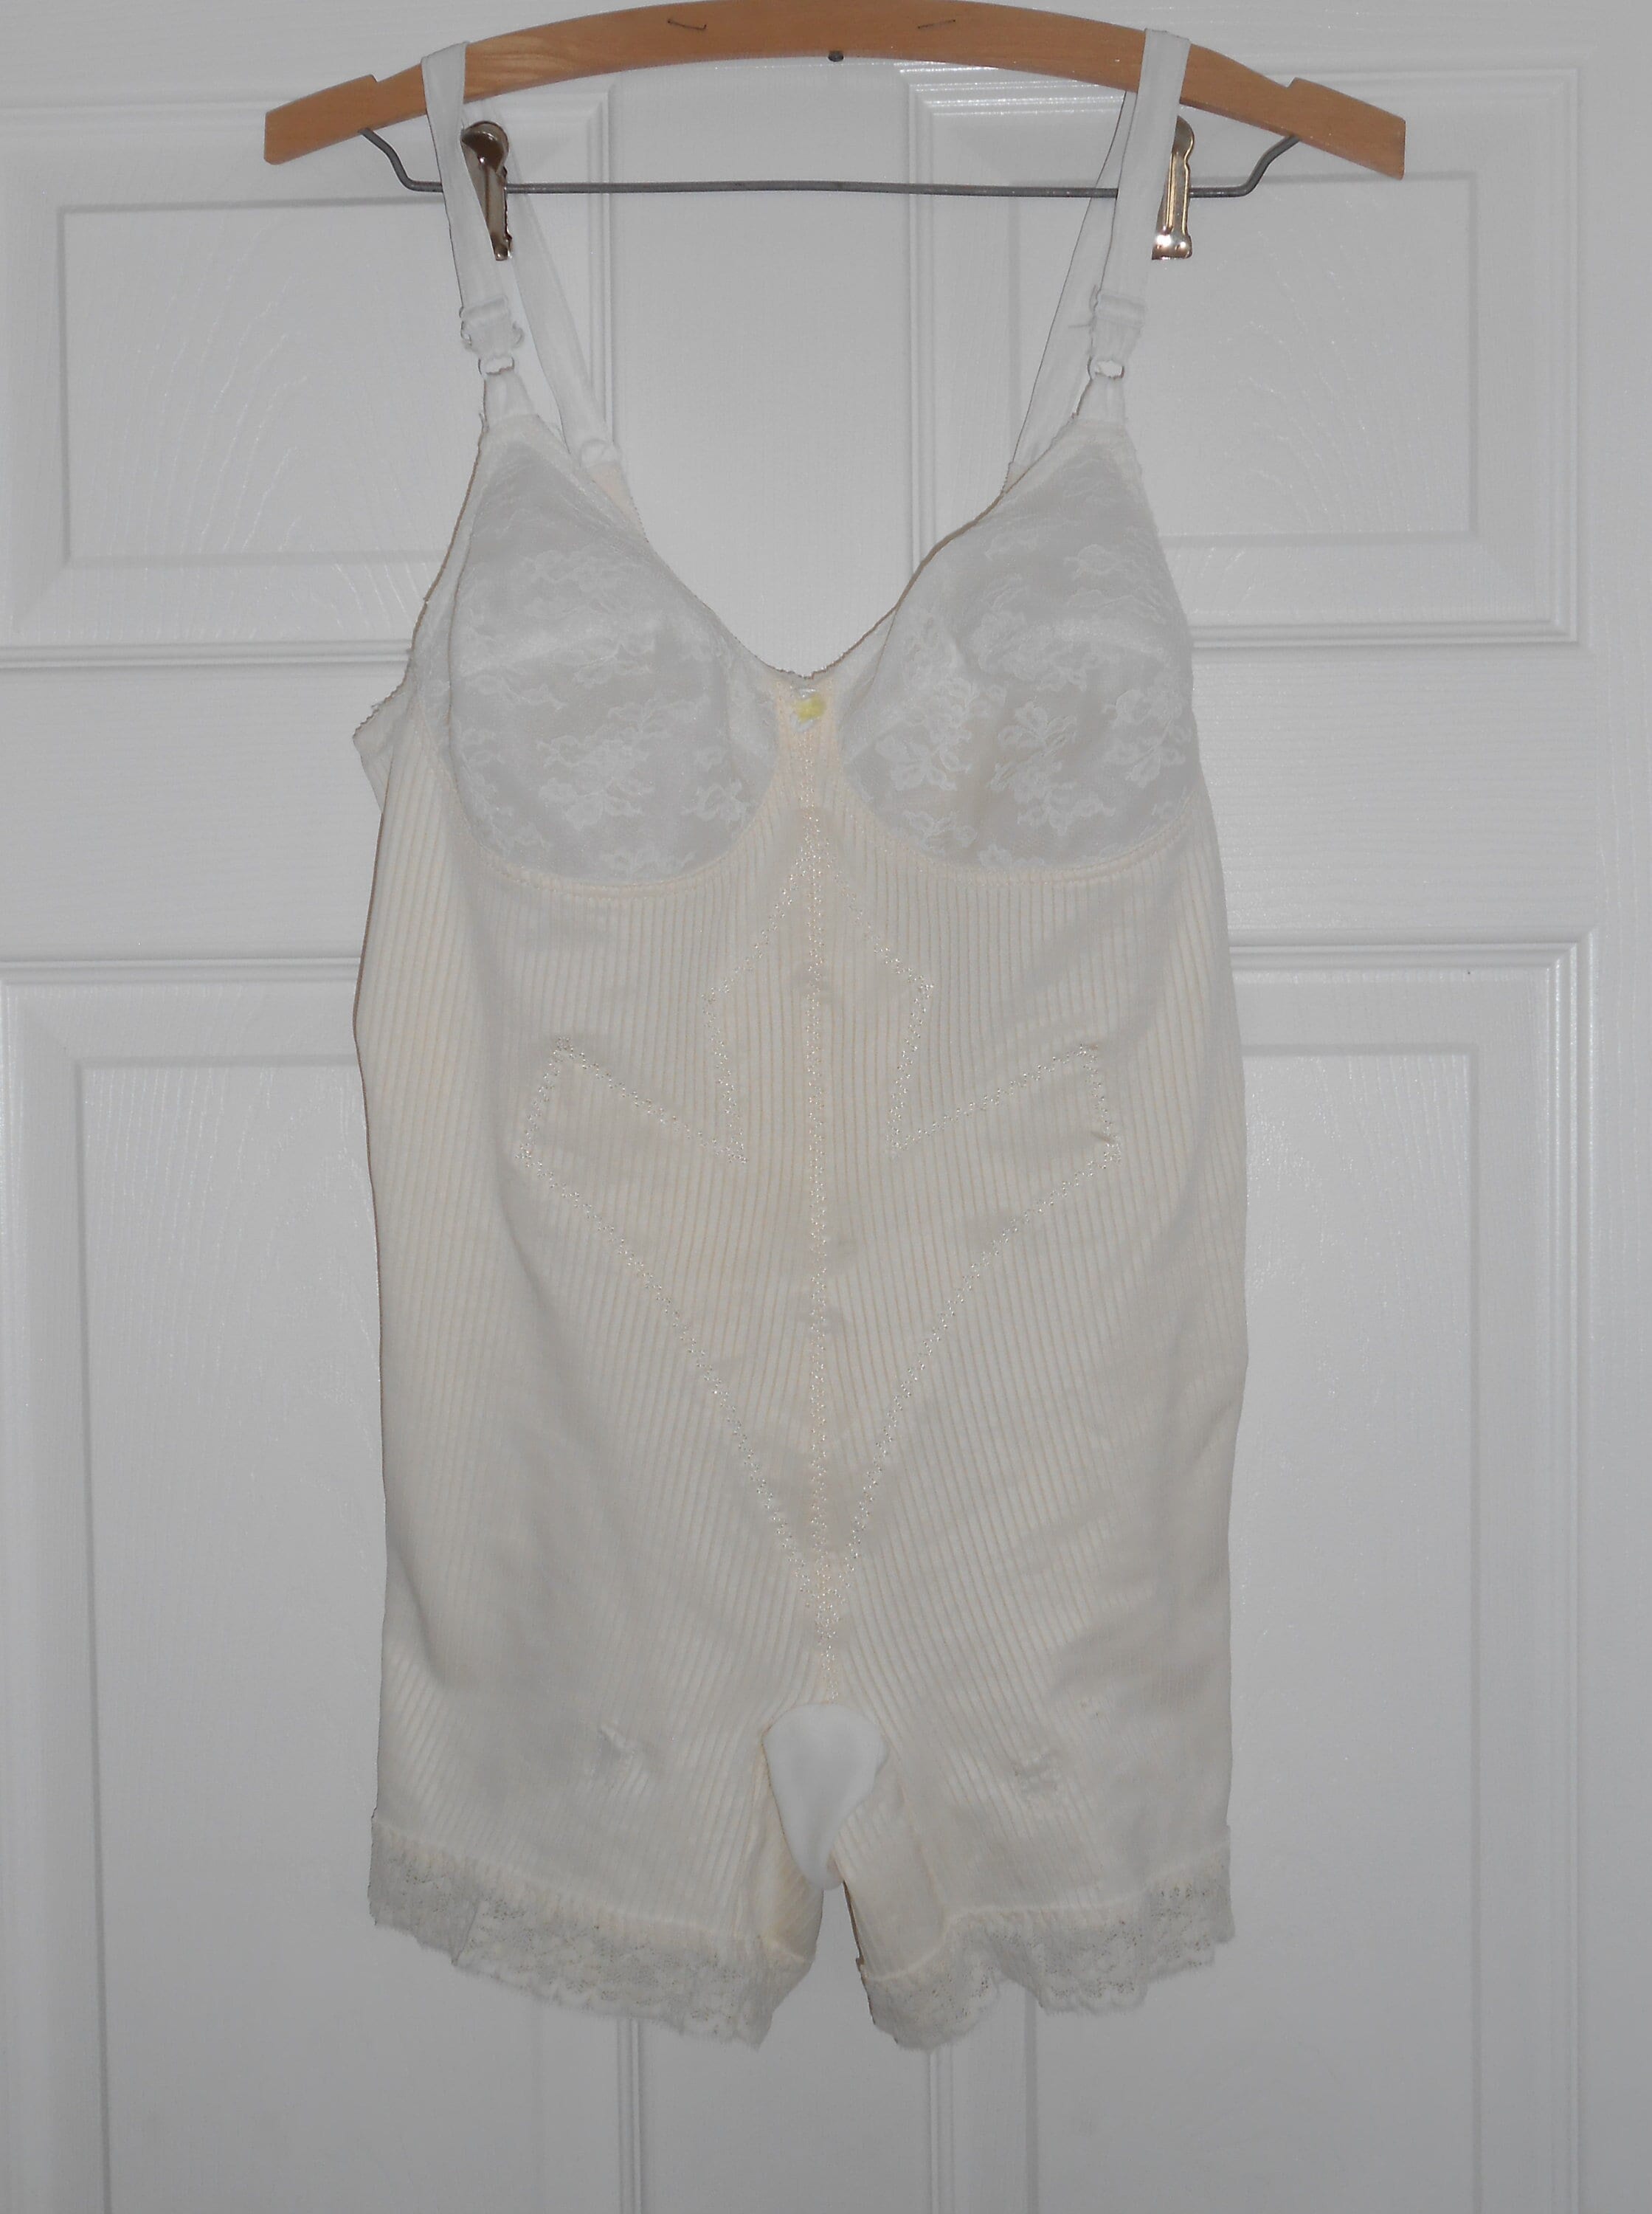 Vintage 1960s Sheer Joy by Bien Jolie All in One Girdle Ivory White Size B  